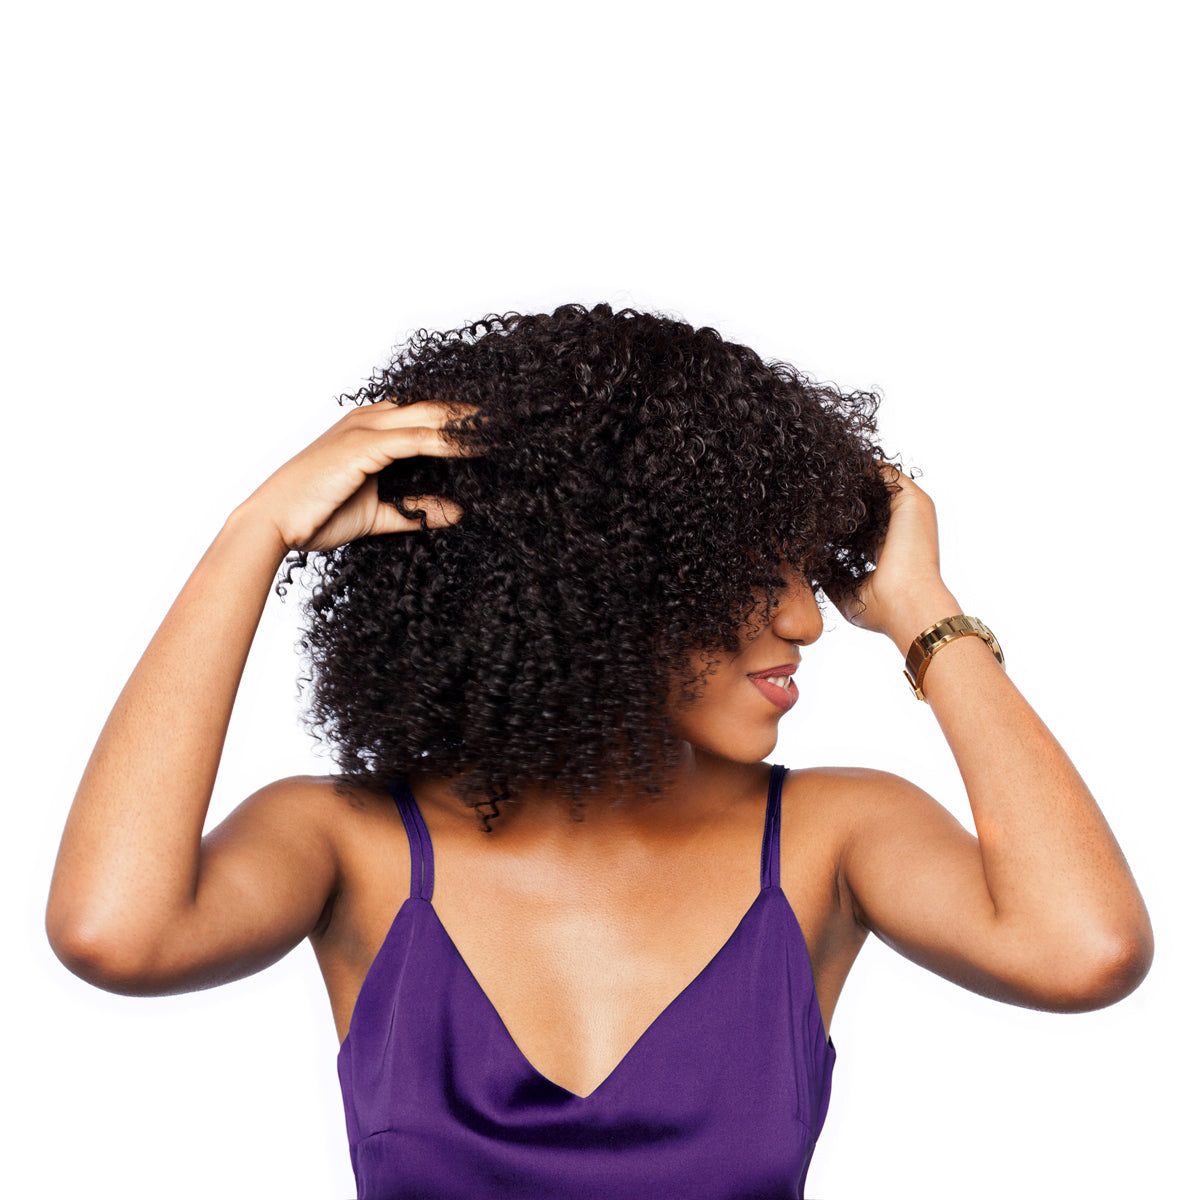 Kinky curly hairstyles give you beautifully defined curls to complete any look